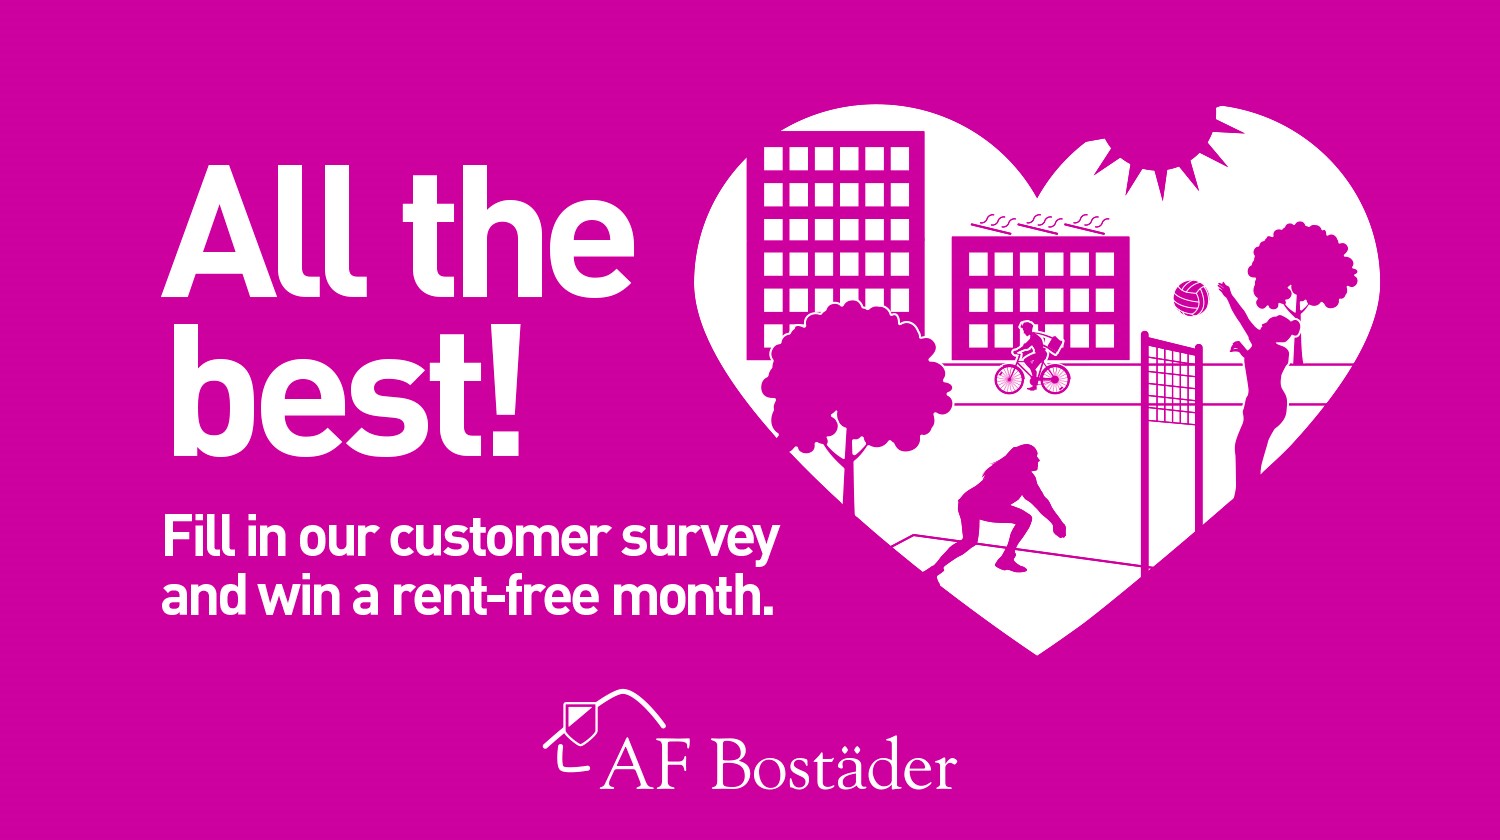 Pink banner saying All the best! Fill in our customer survey and win a rent-free month